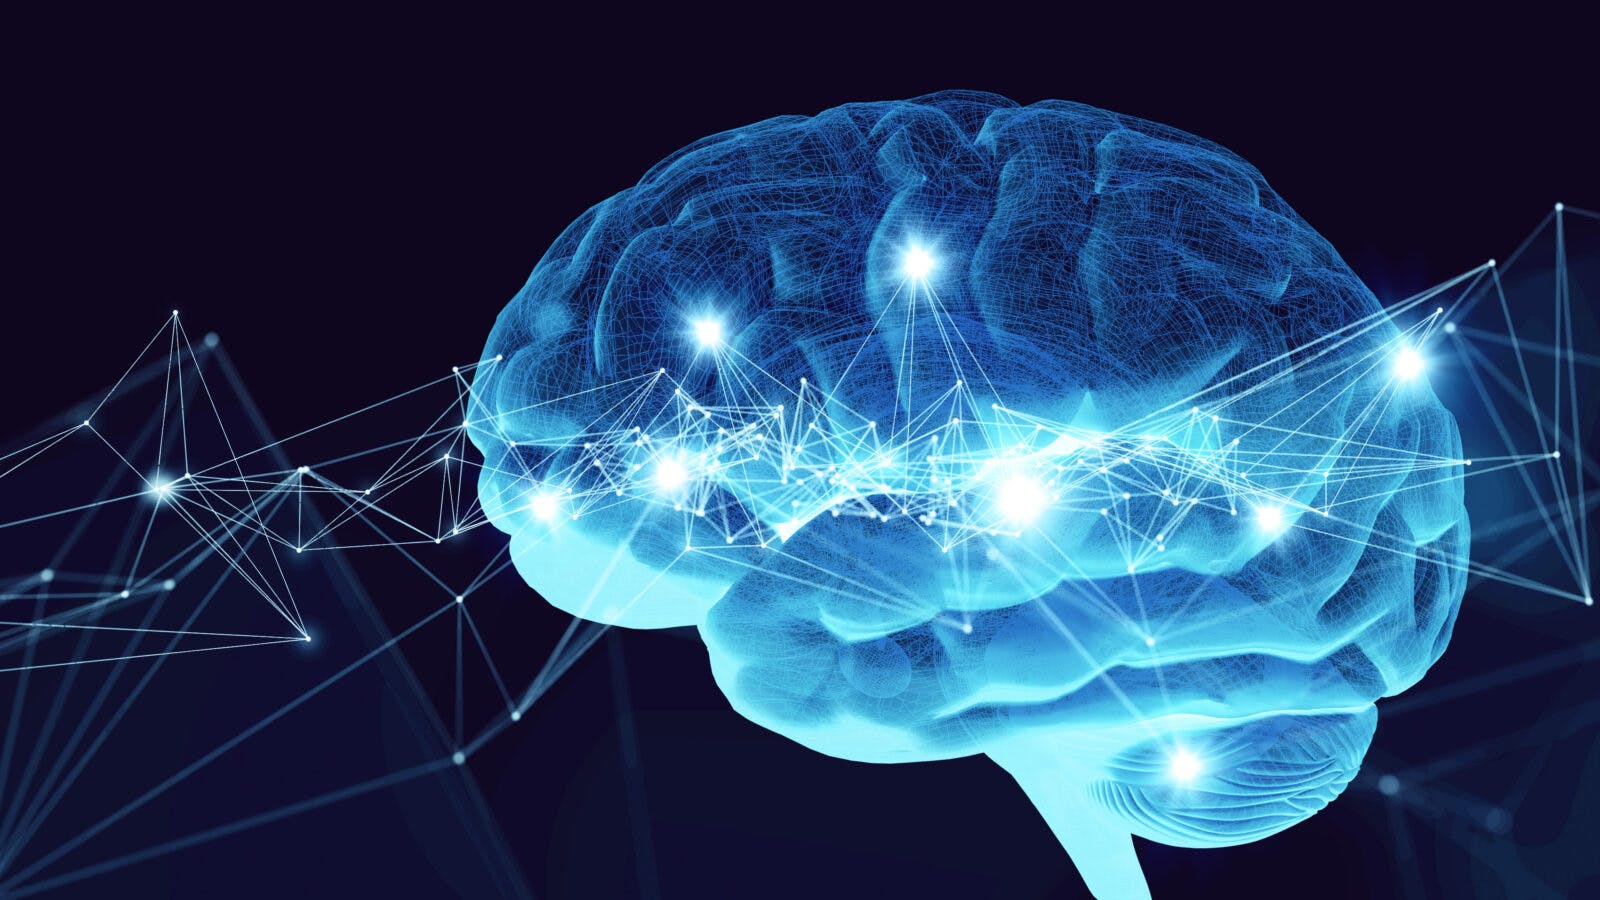 Unlocking the Mind: The Neuroscience Behind Our Conscious Reality